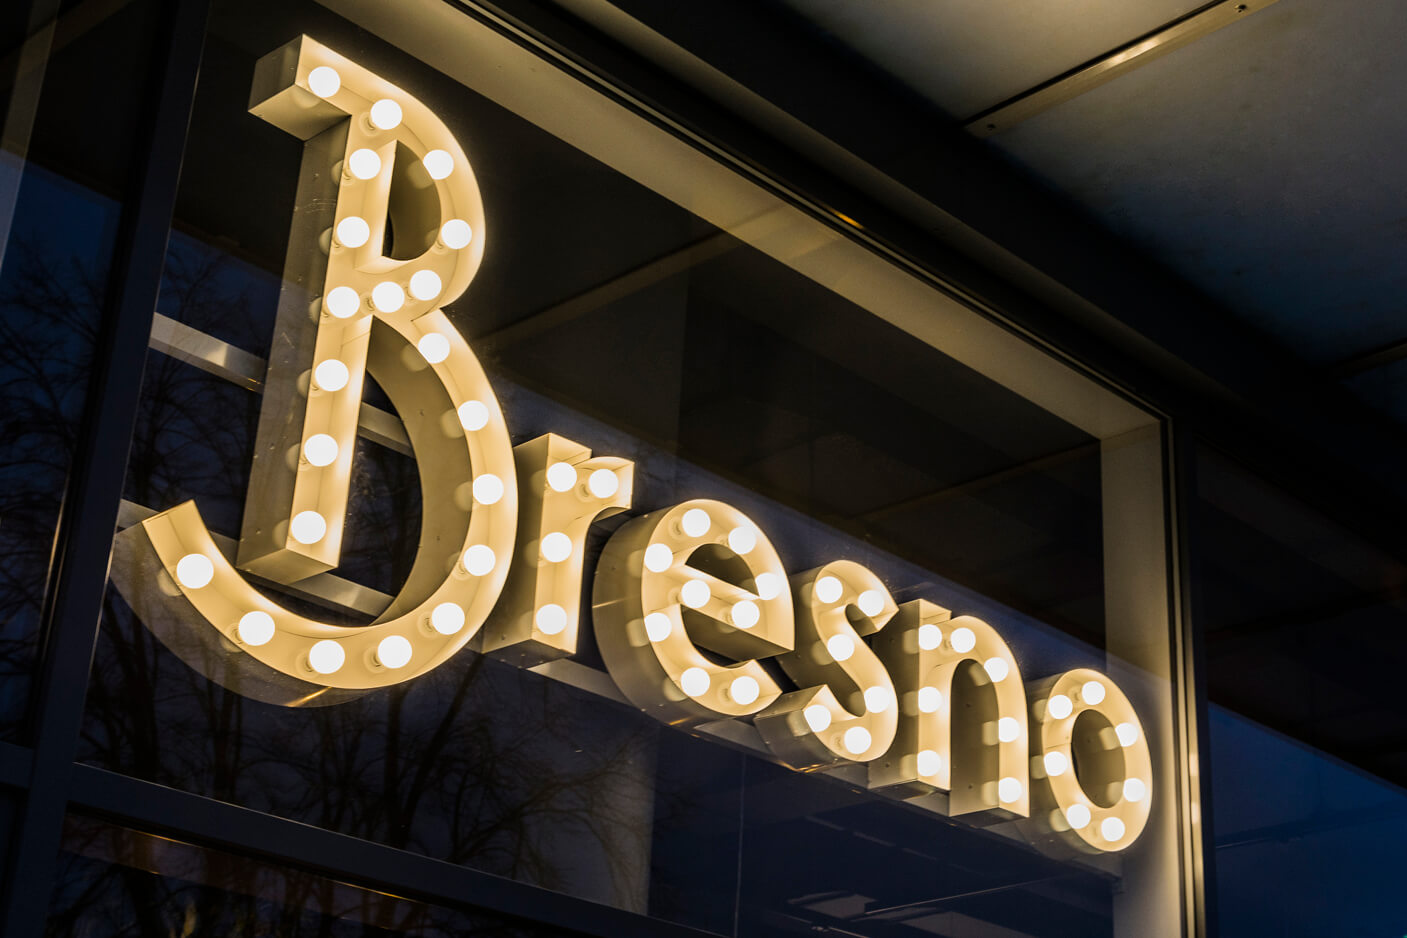 Bresno - Bresno - letters with bulbs behind the glass